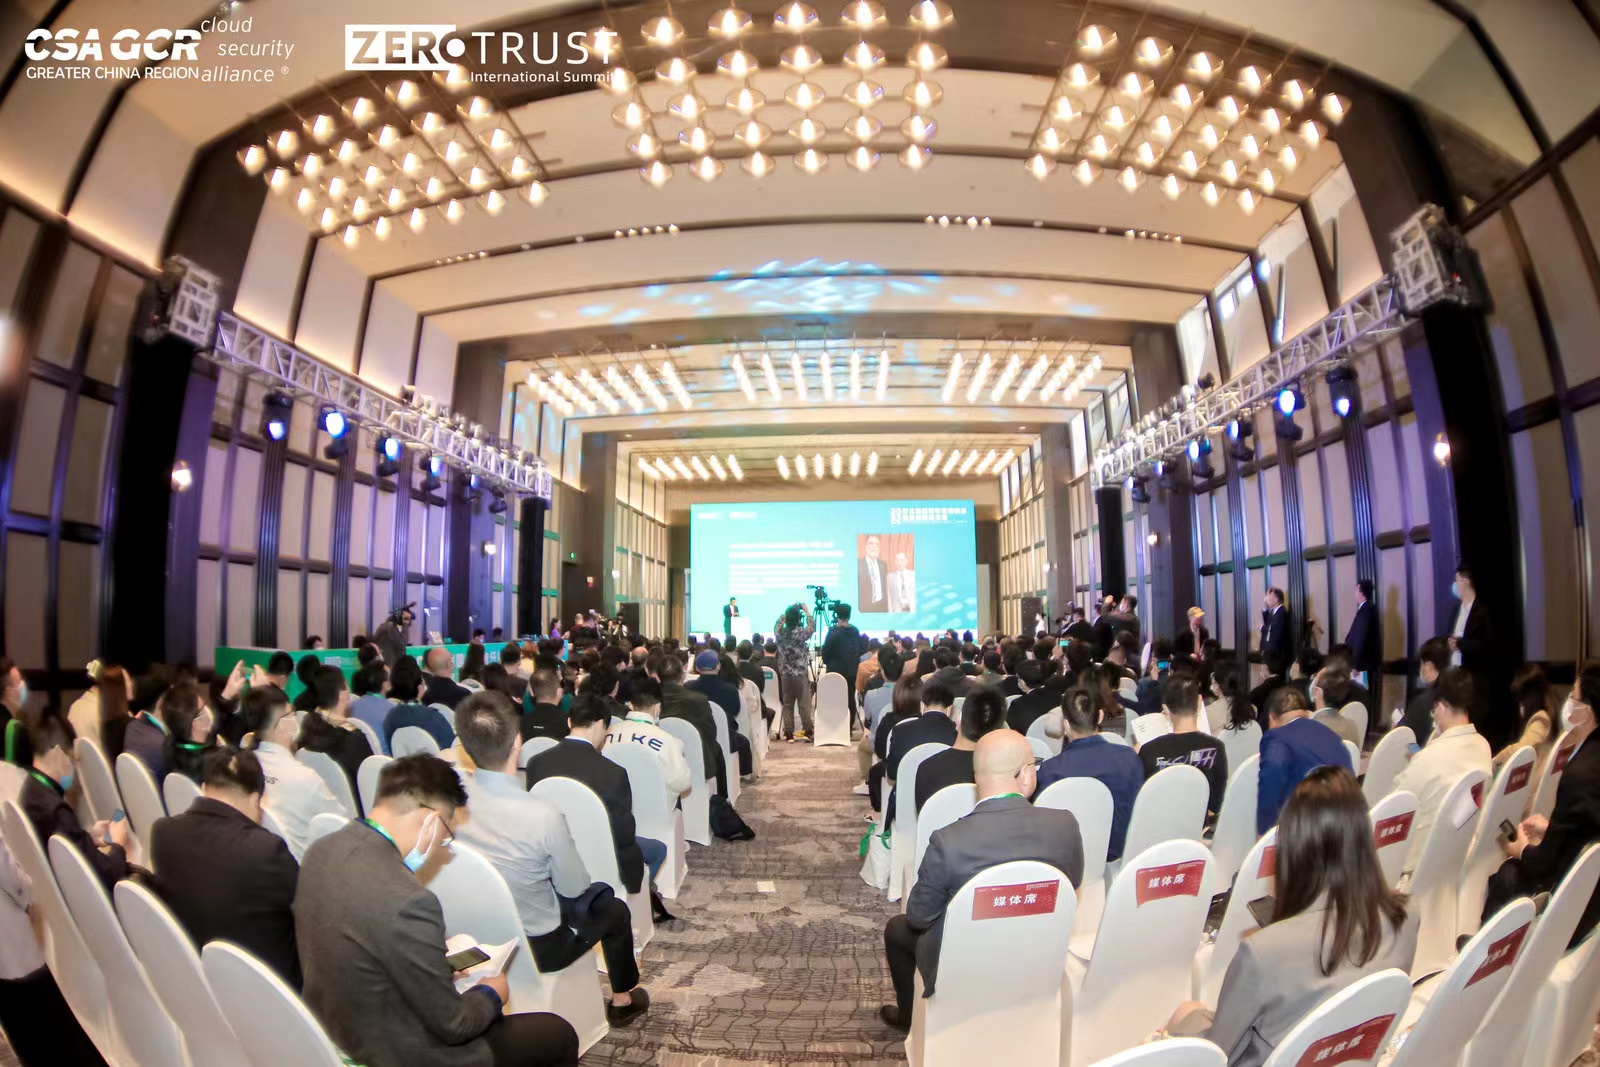 The 3rd International Zero Trust Summit and Xisai Forum was successfully held - Bamboocloud won the award